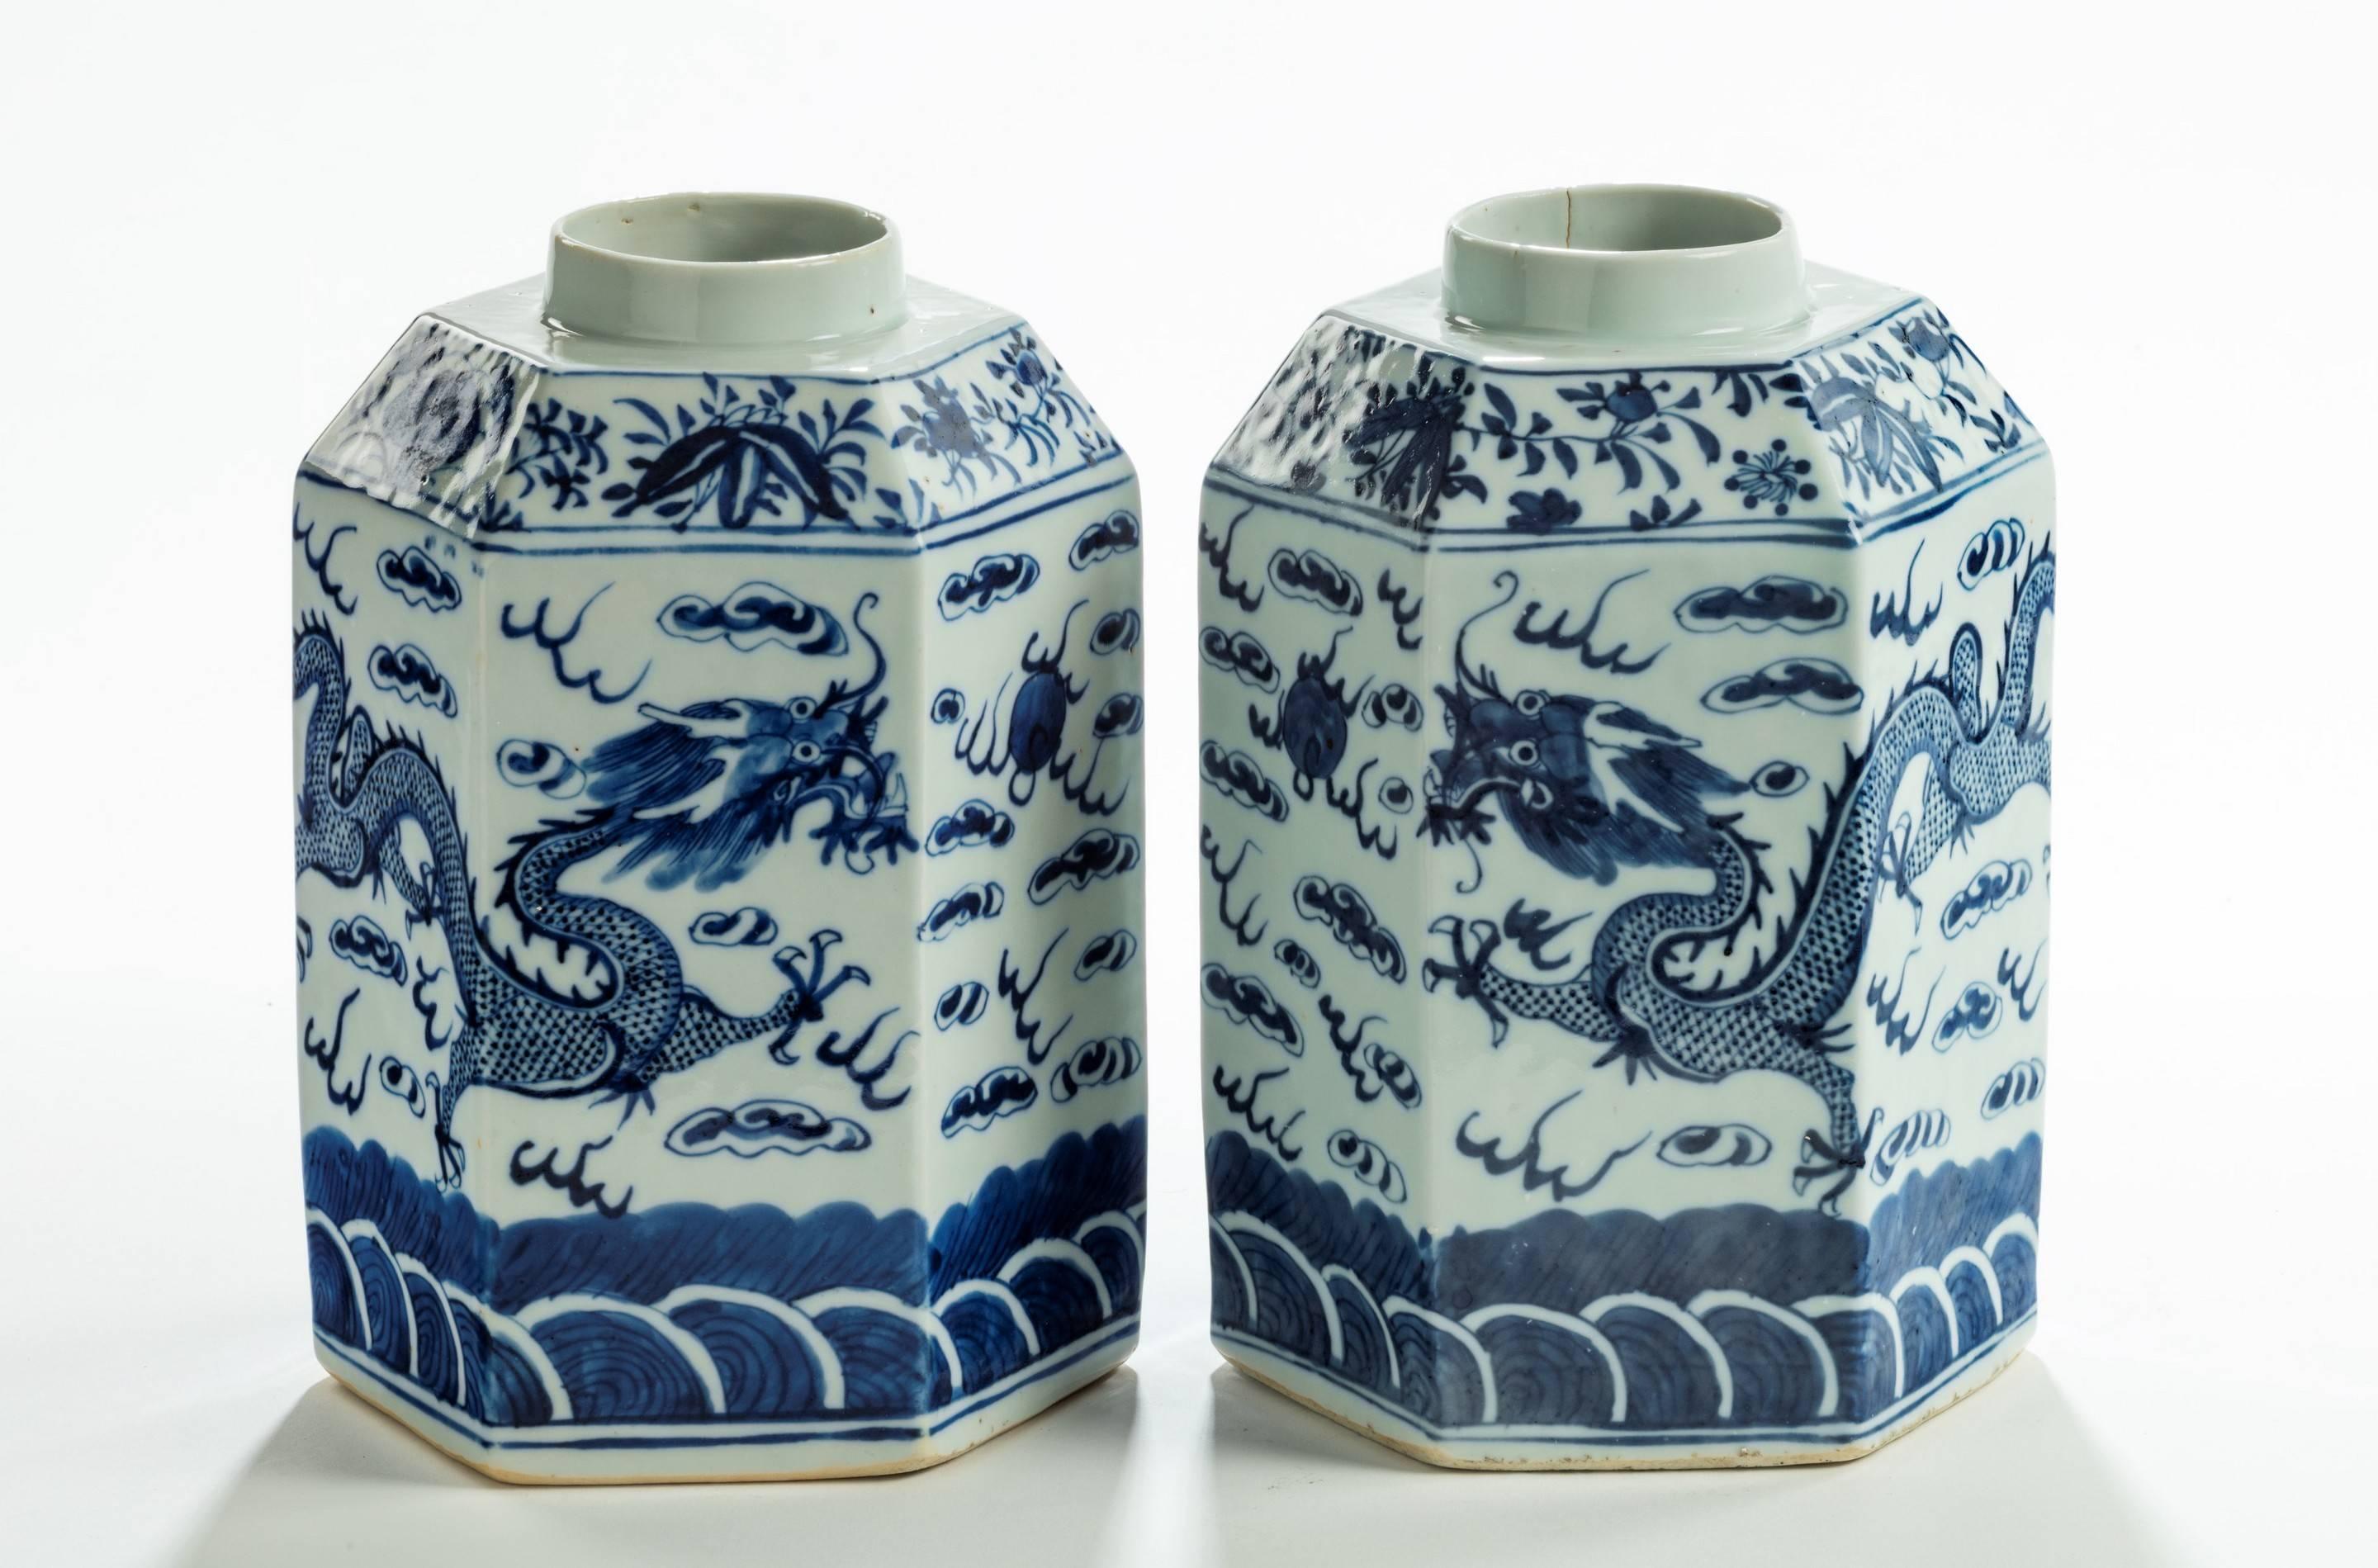 A pair of 19th century blue and white Chinese hexagonal shaped tea jars. Late 19th century. Two dragons amongst the clouds over the sea or mountains? Now ideal for converting into lamps.